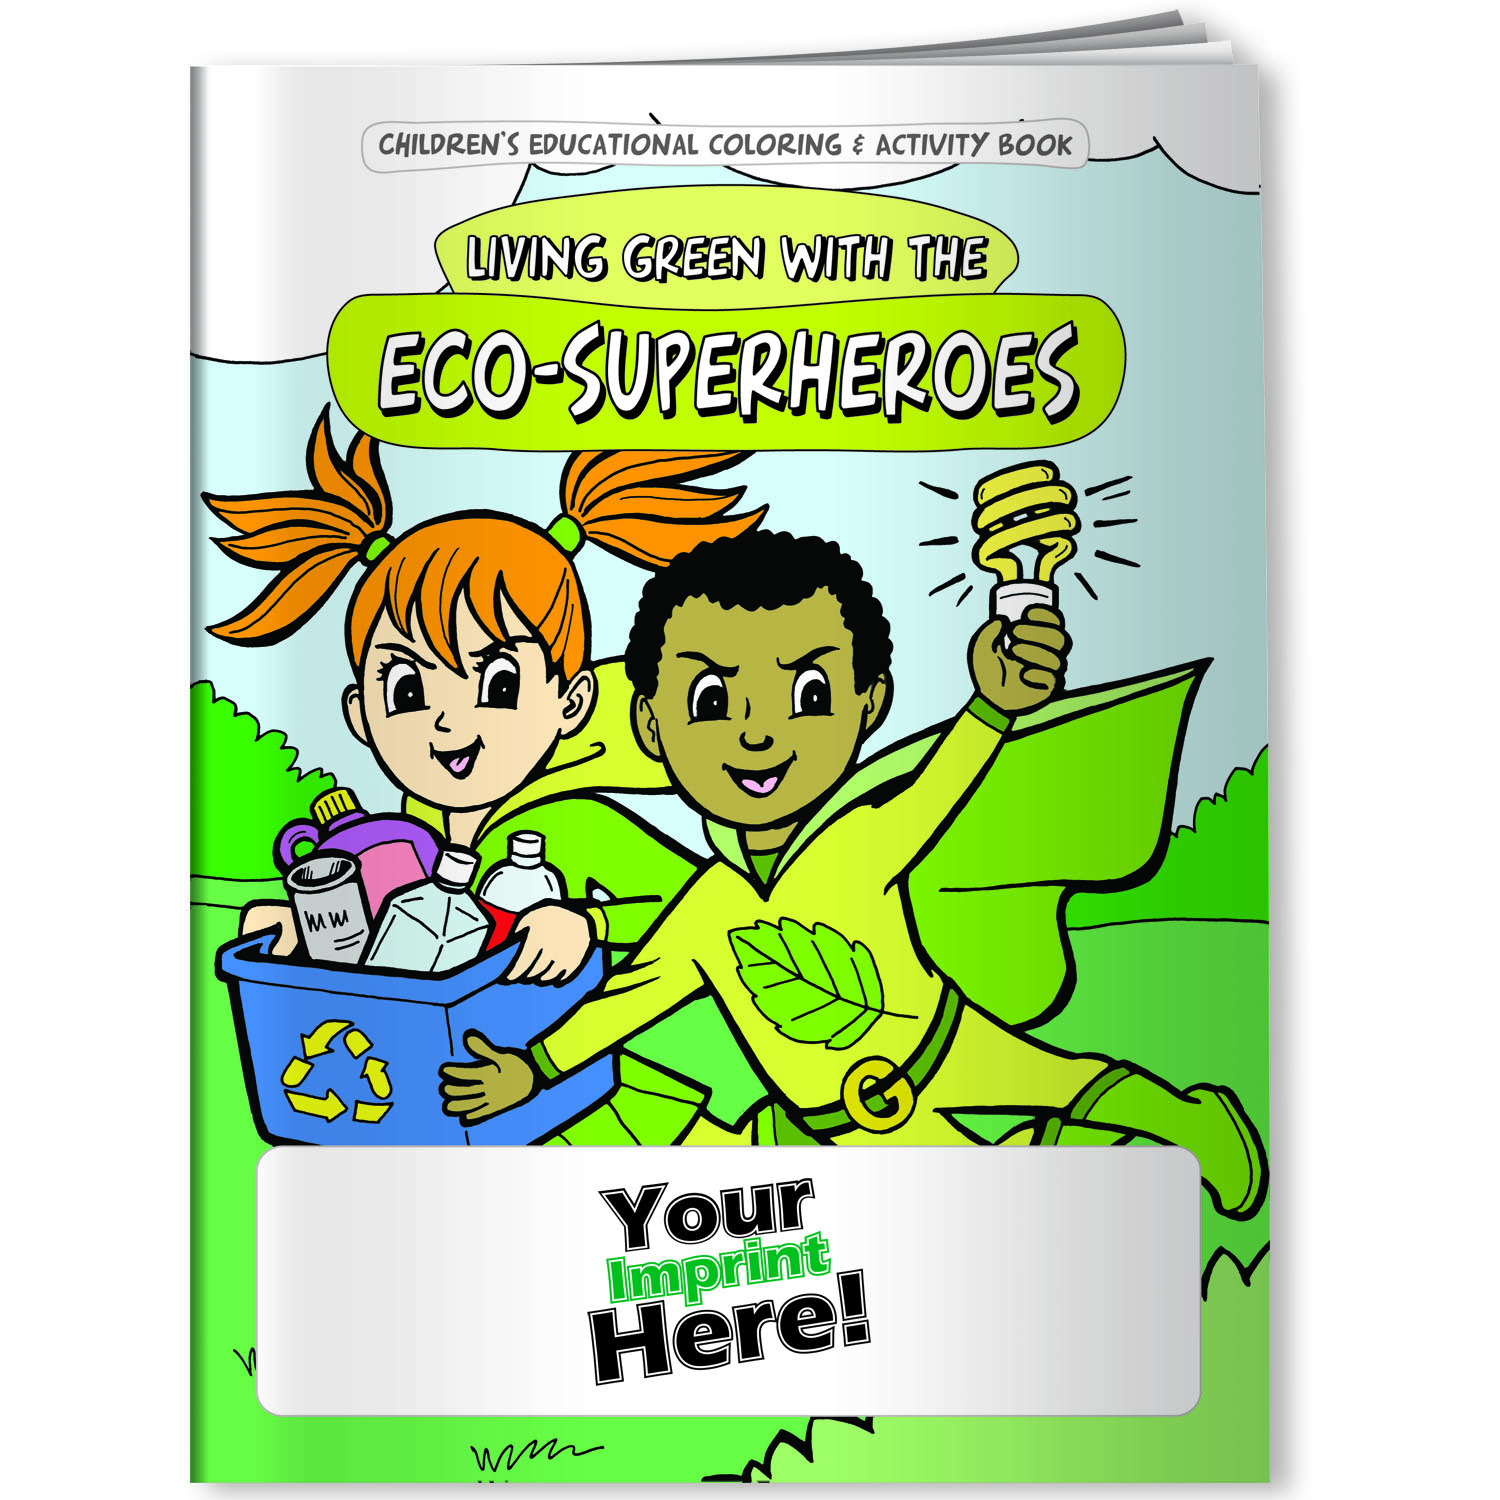 Personalized Coloring Books USA Made Coloring Books Wholesale Coloring Books